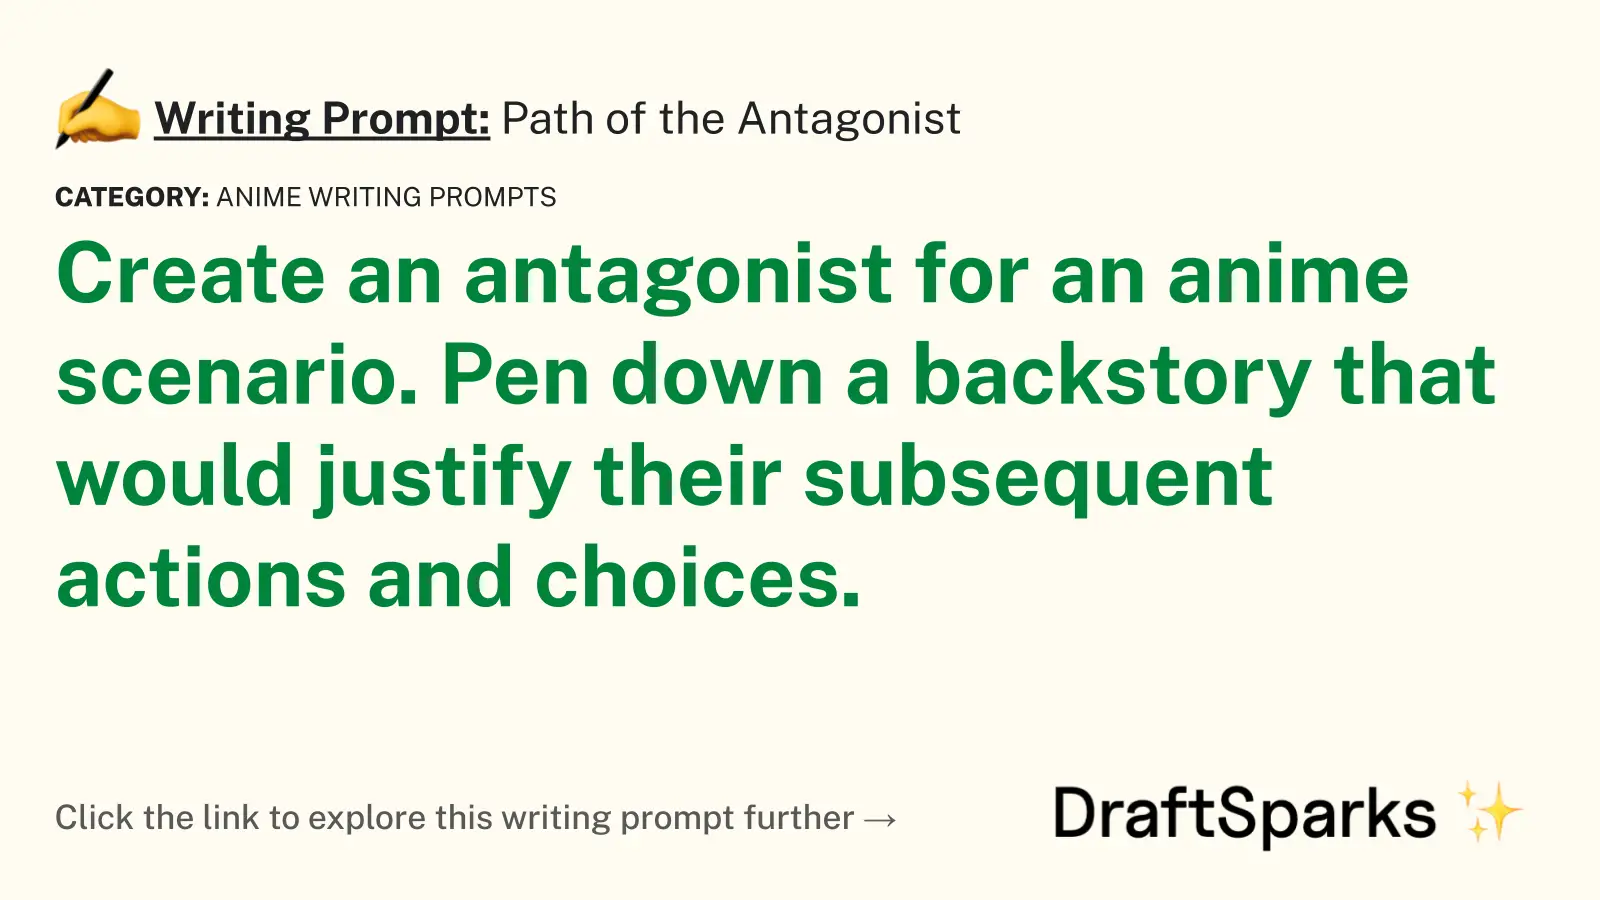 Path of the Antagonist